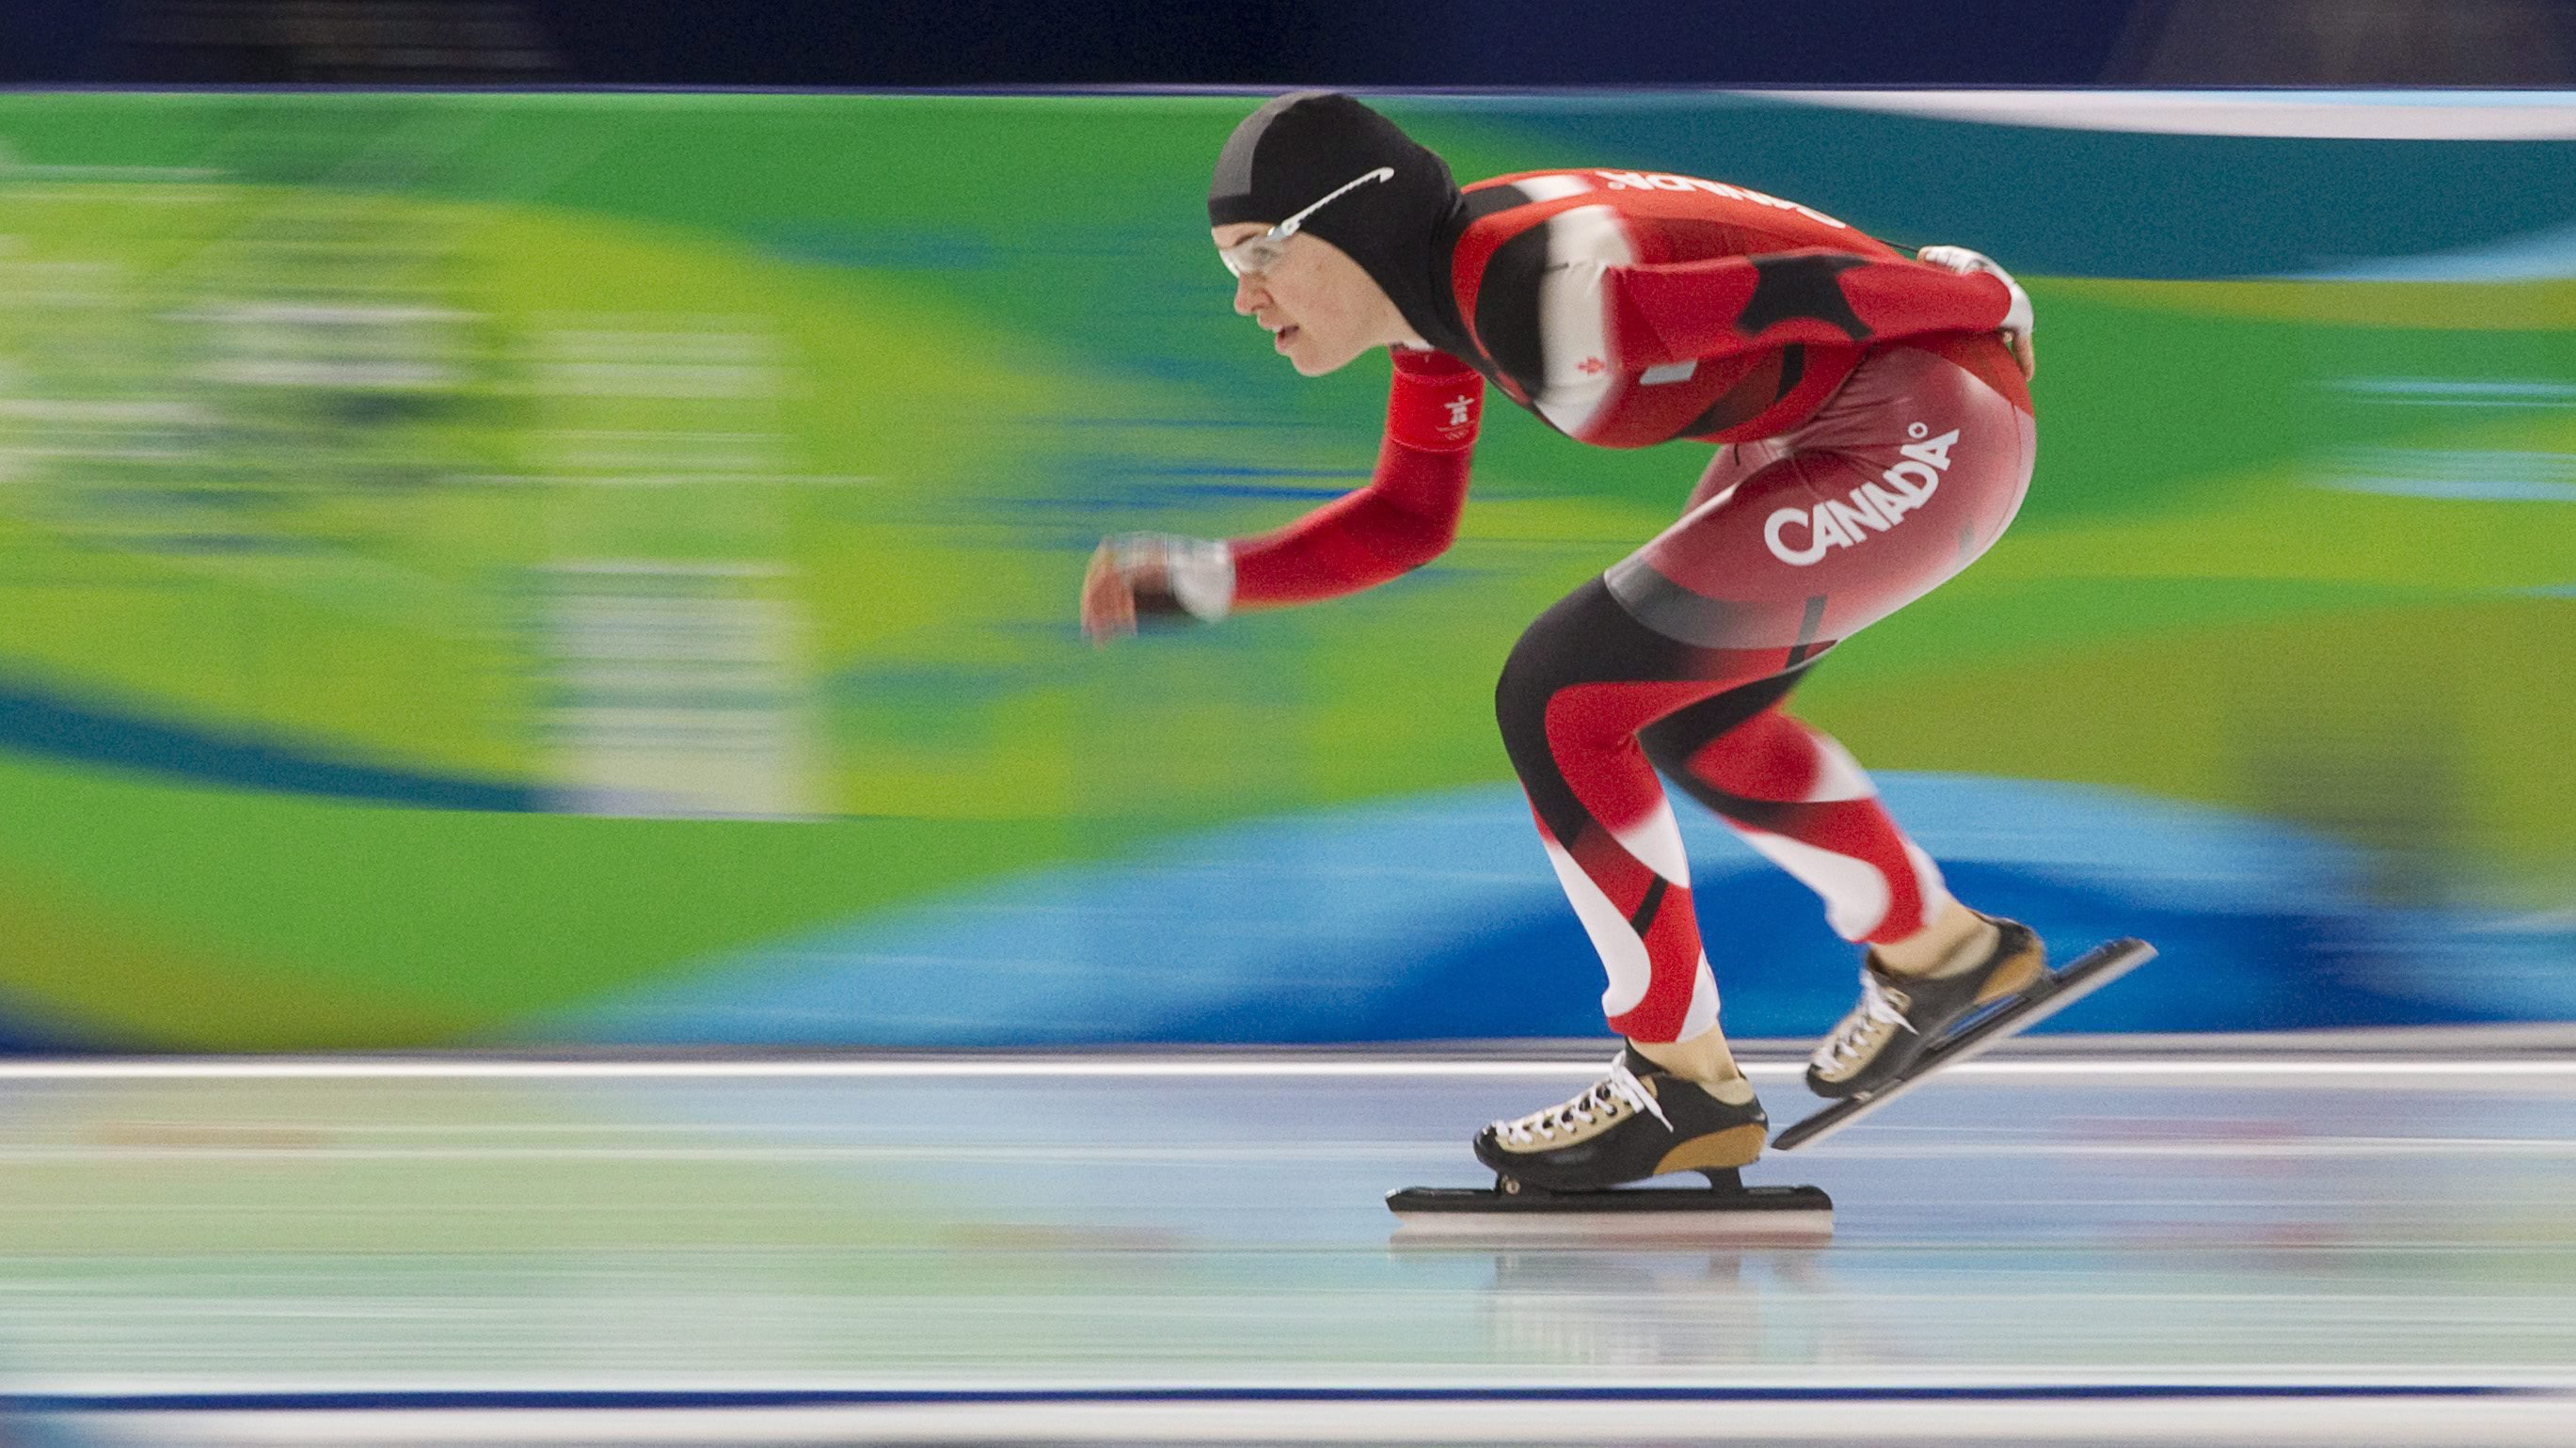 Canadian speed skater Clara Hughes races to bronze in the women's 5000m event at the XXI Olympic Winter Games in Richmond, B.C., Wednesday Feb. 24, 2010. THE CANADIAN PRESS/Adrian Wyld